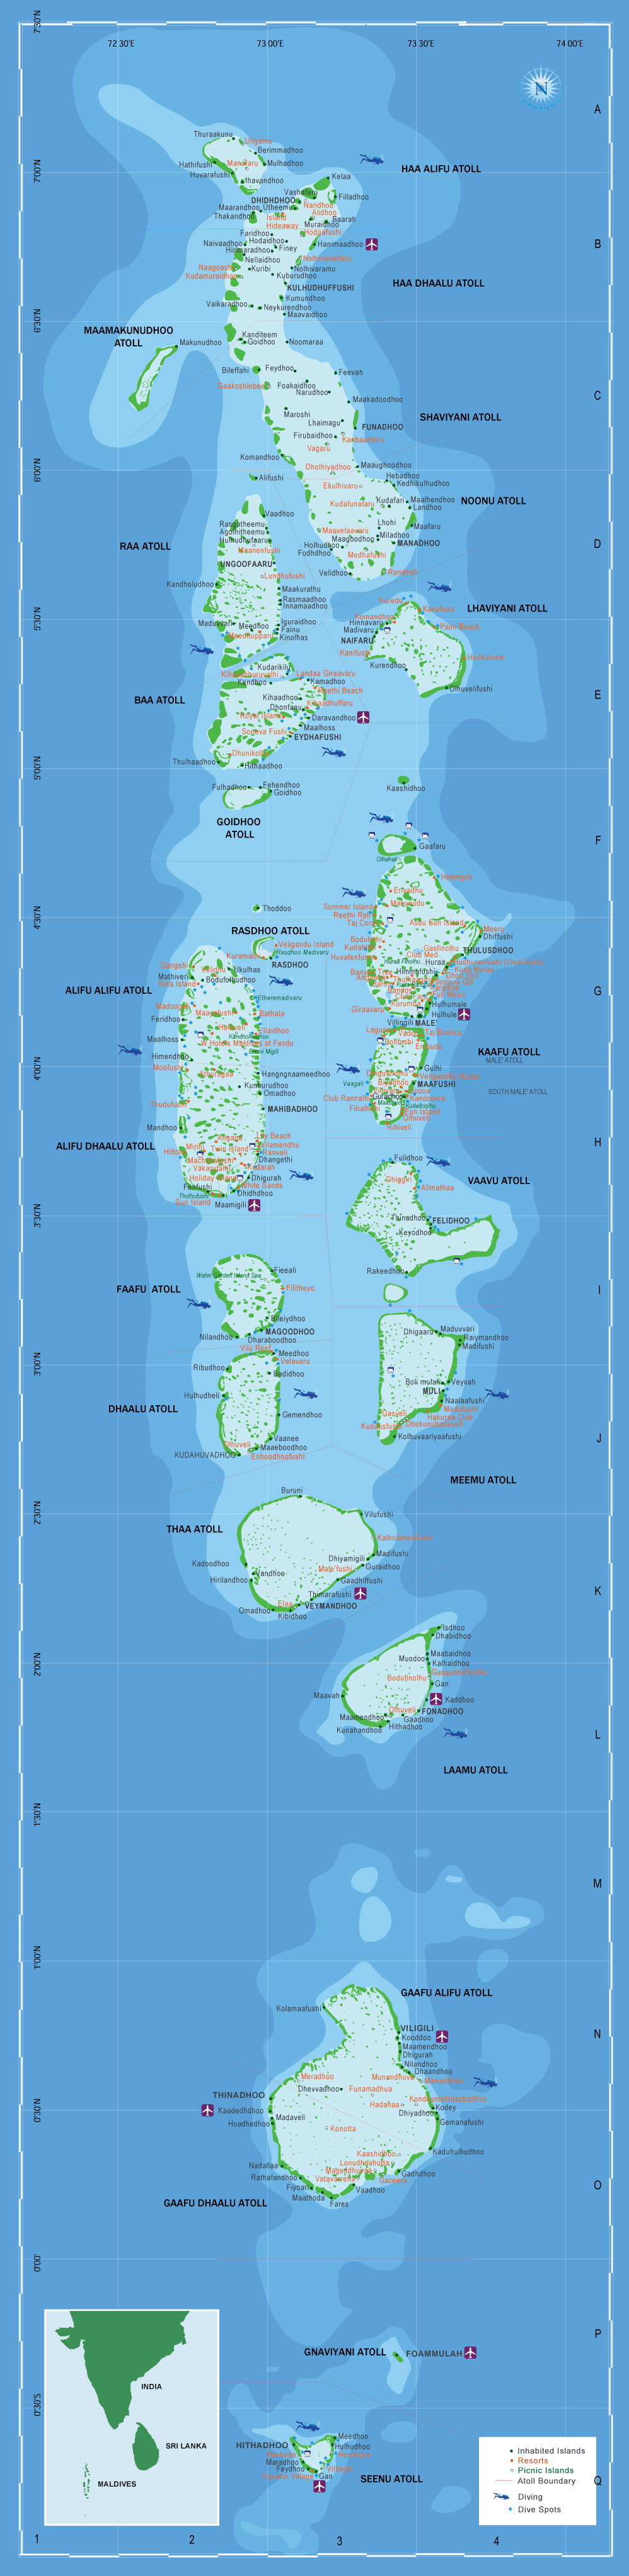 Where is the Maldives located on the world map